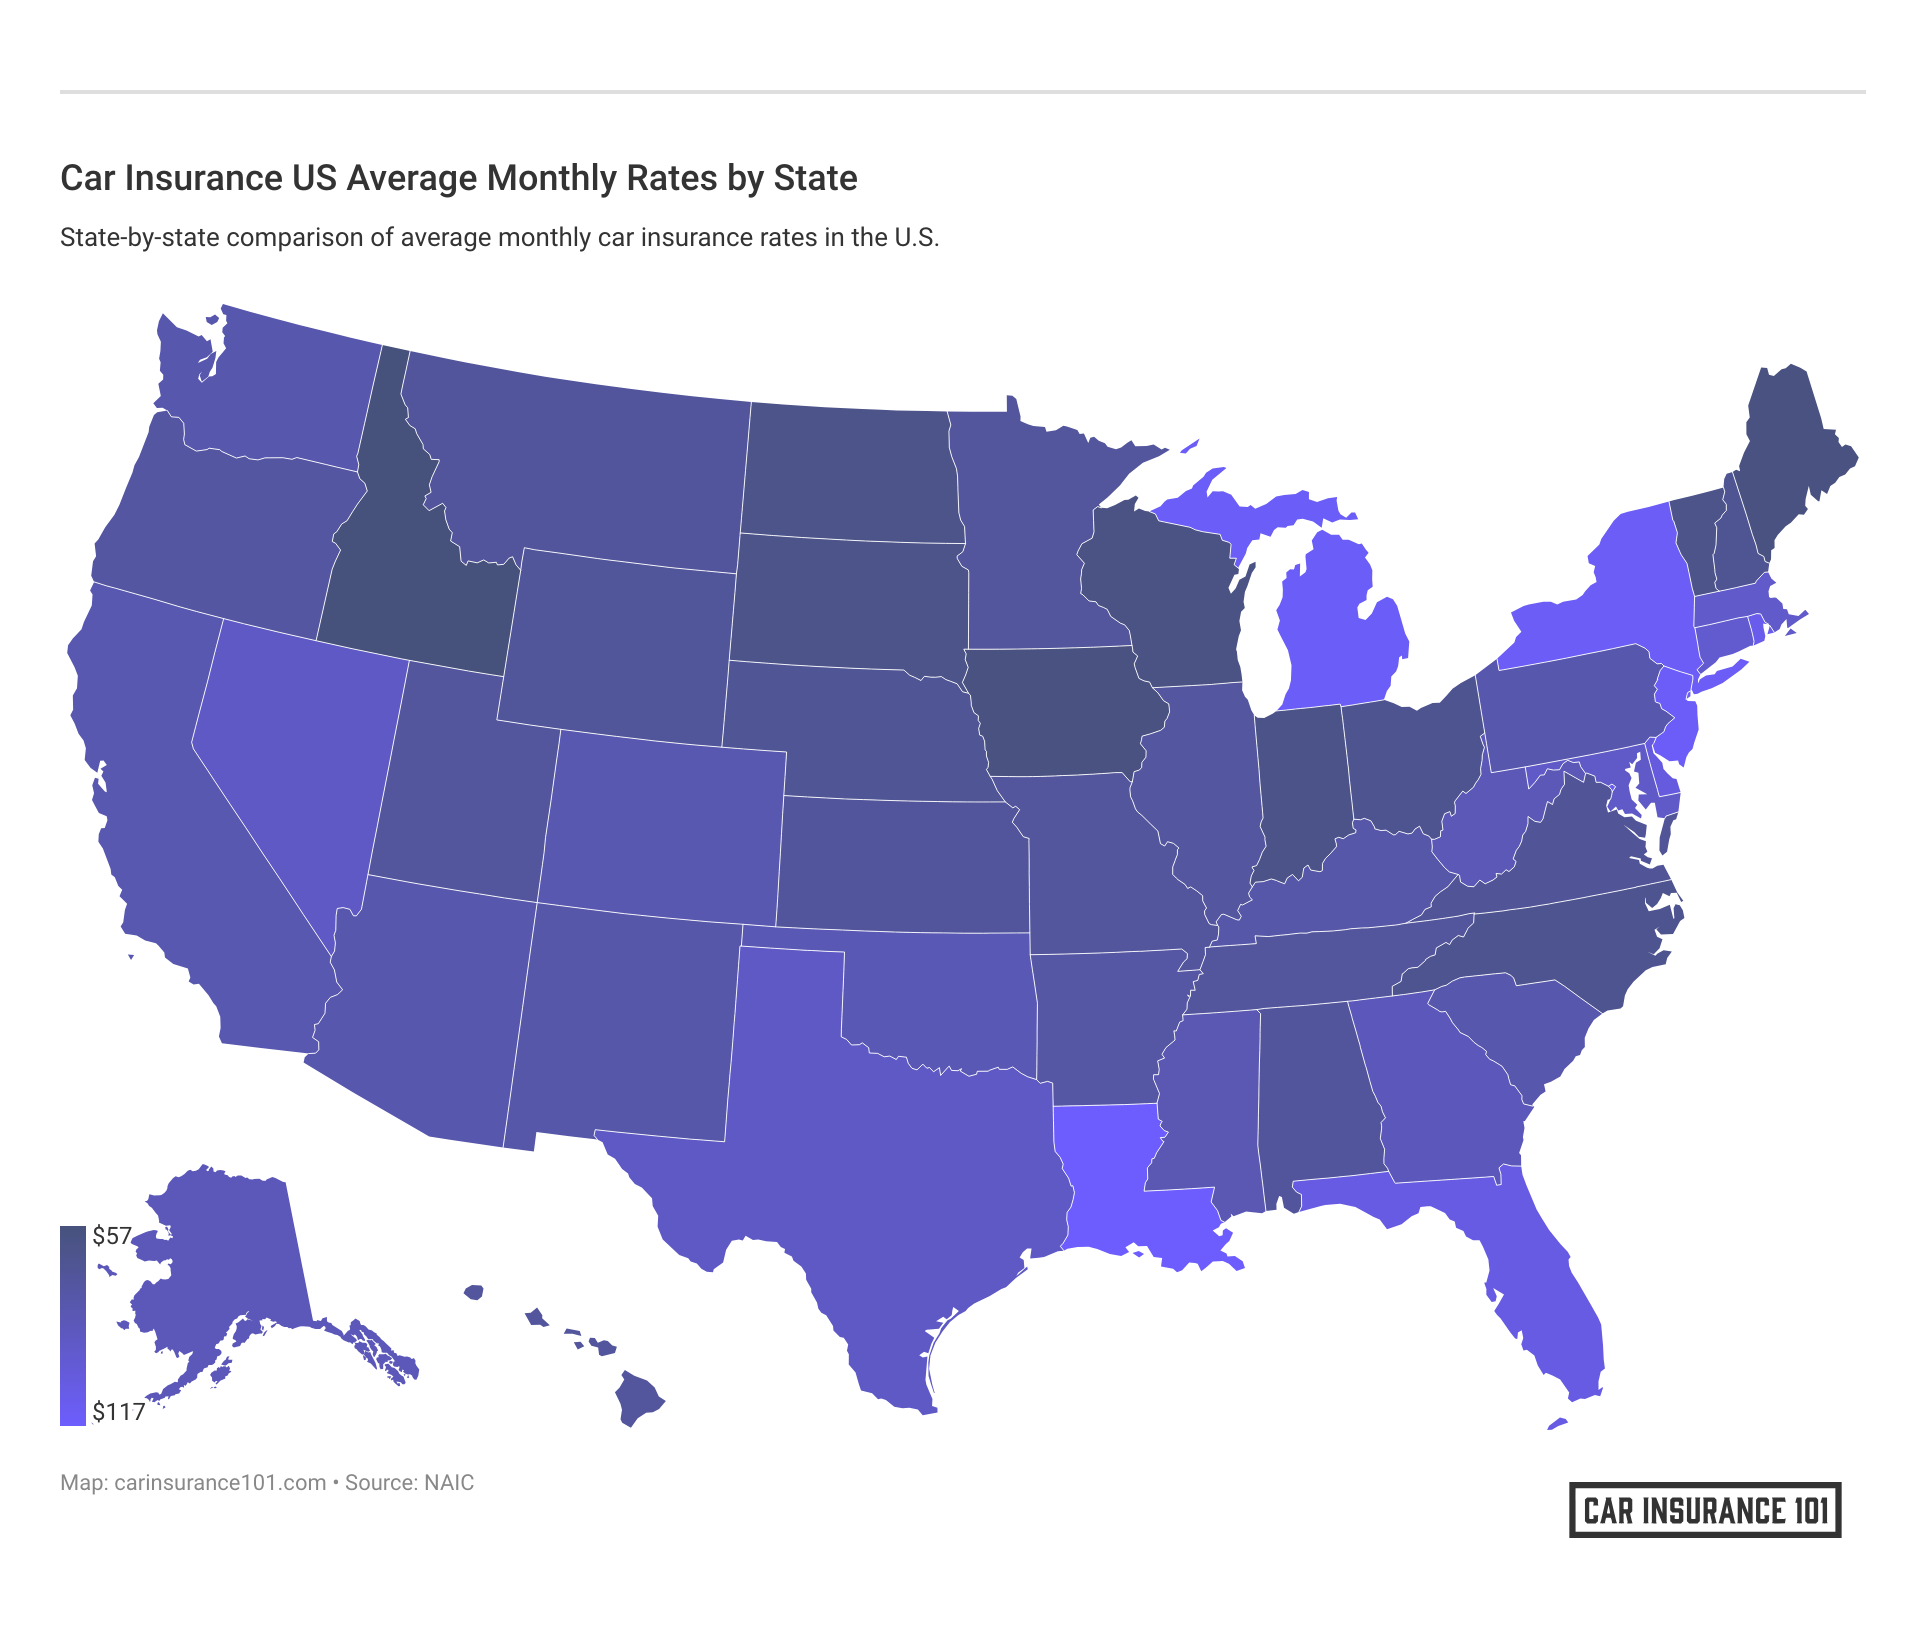 <h3>Car Insurance US Average Monthly Rates by State</h3>